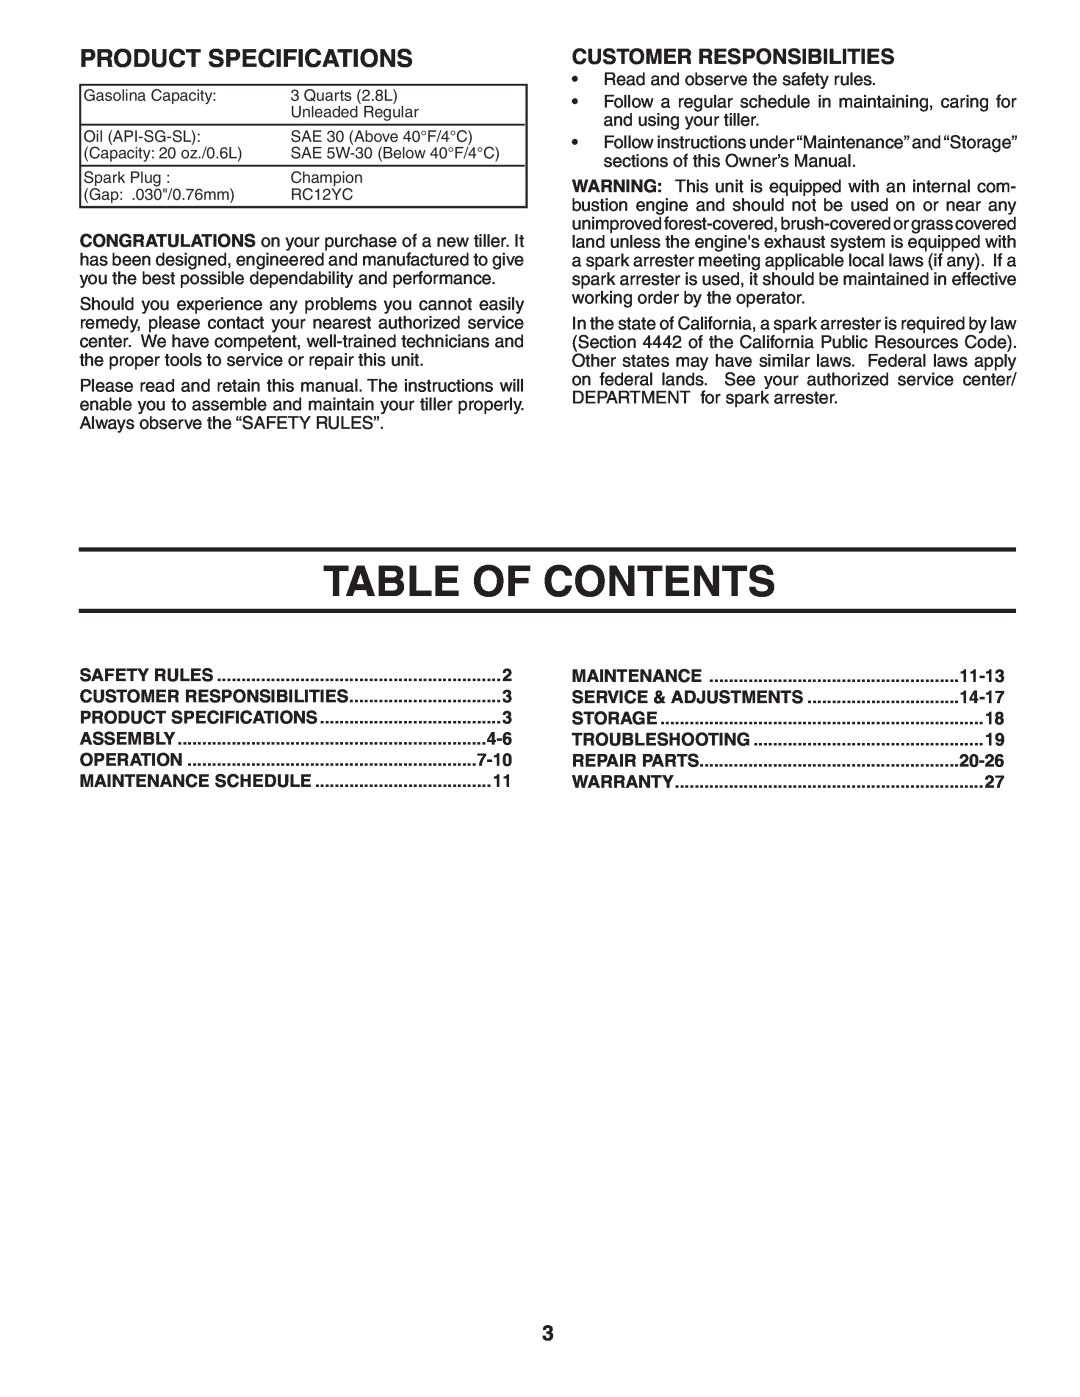 Poulan 96092001200, 403701 owner manual Table Of Contents, Product Specifications, Customer Responsibilities 